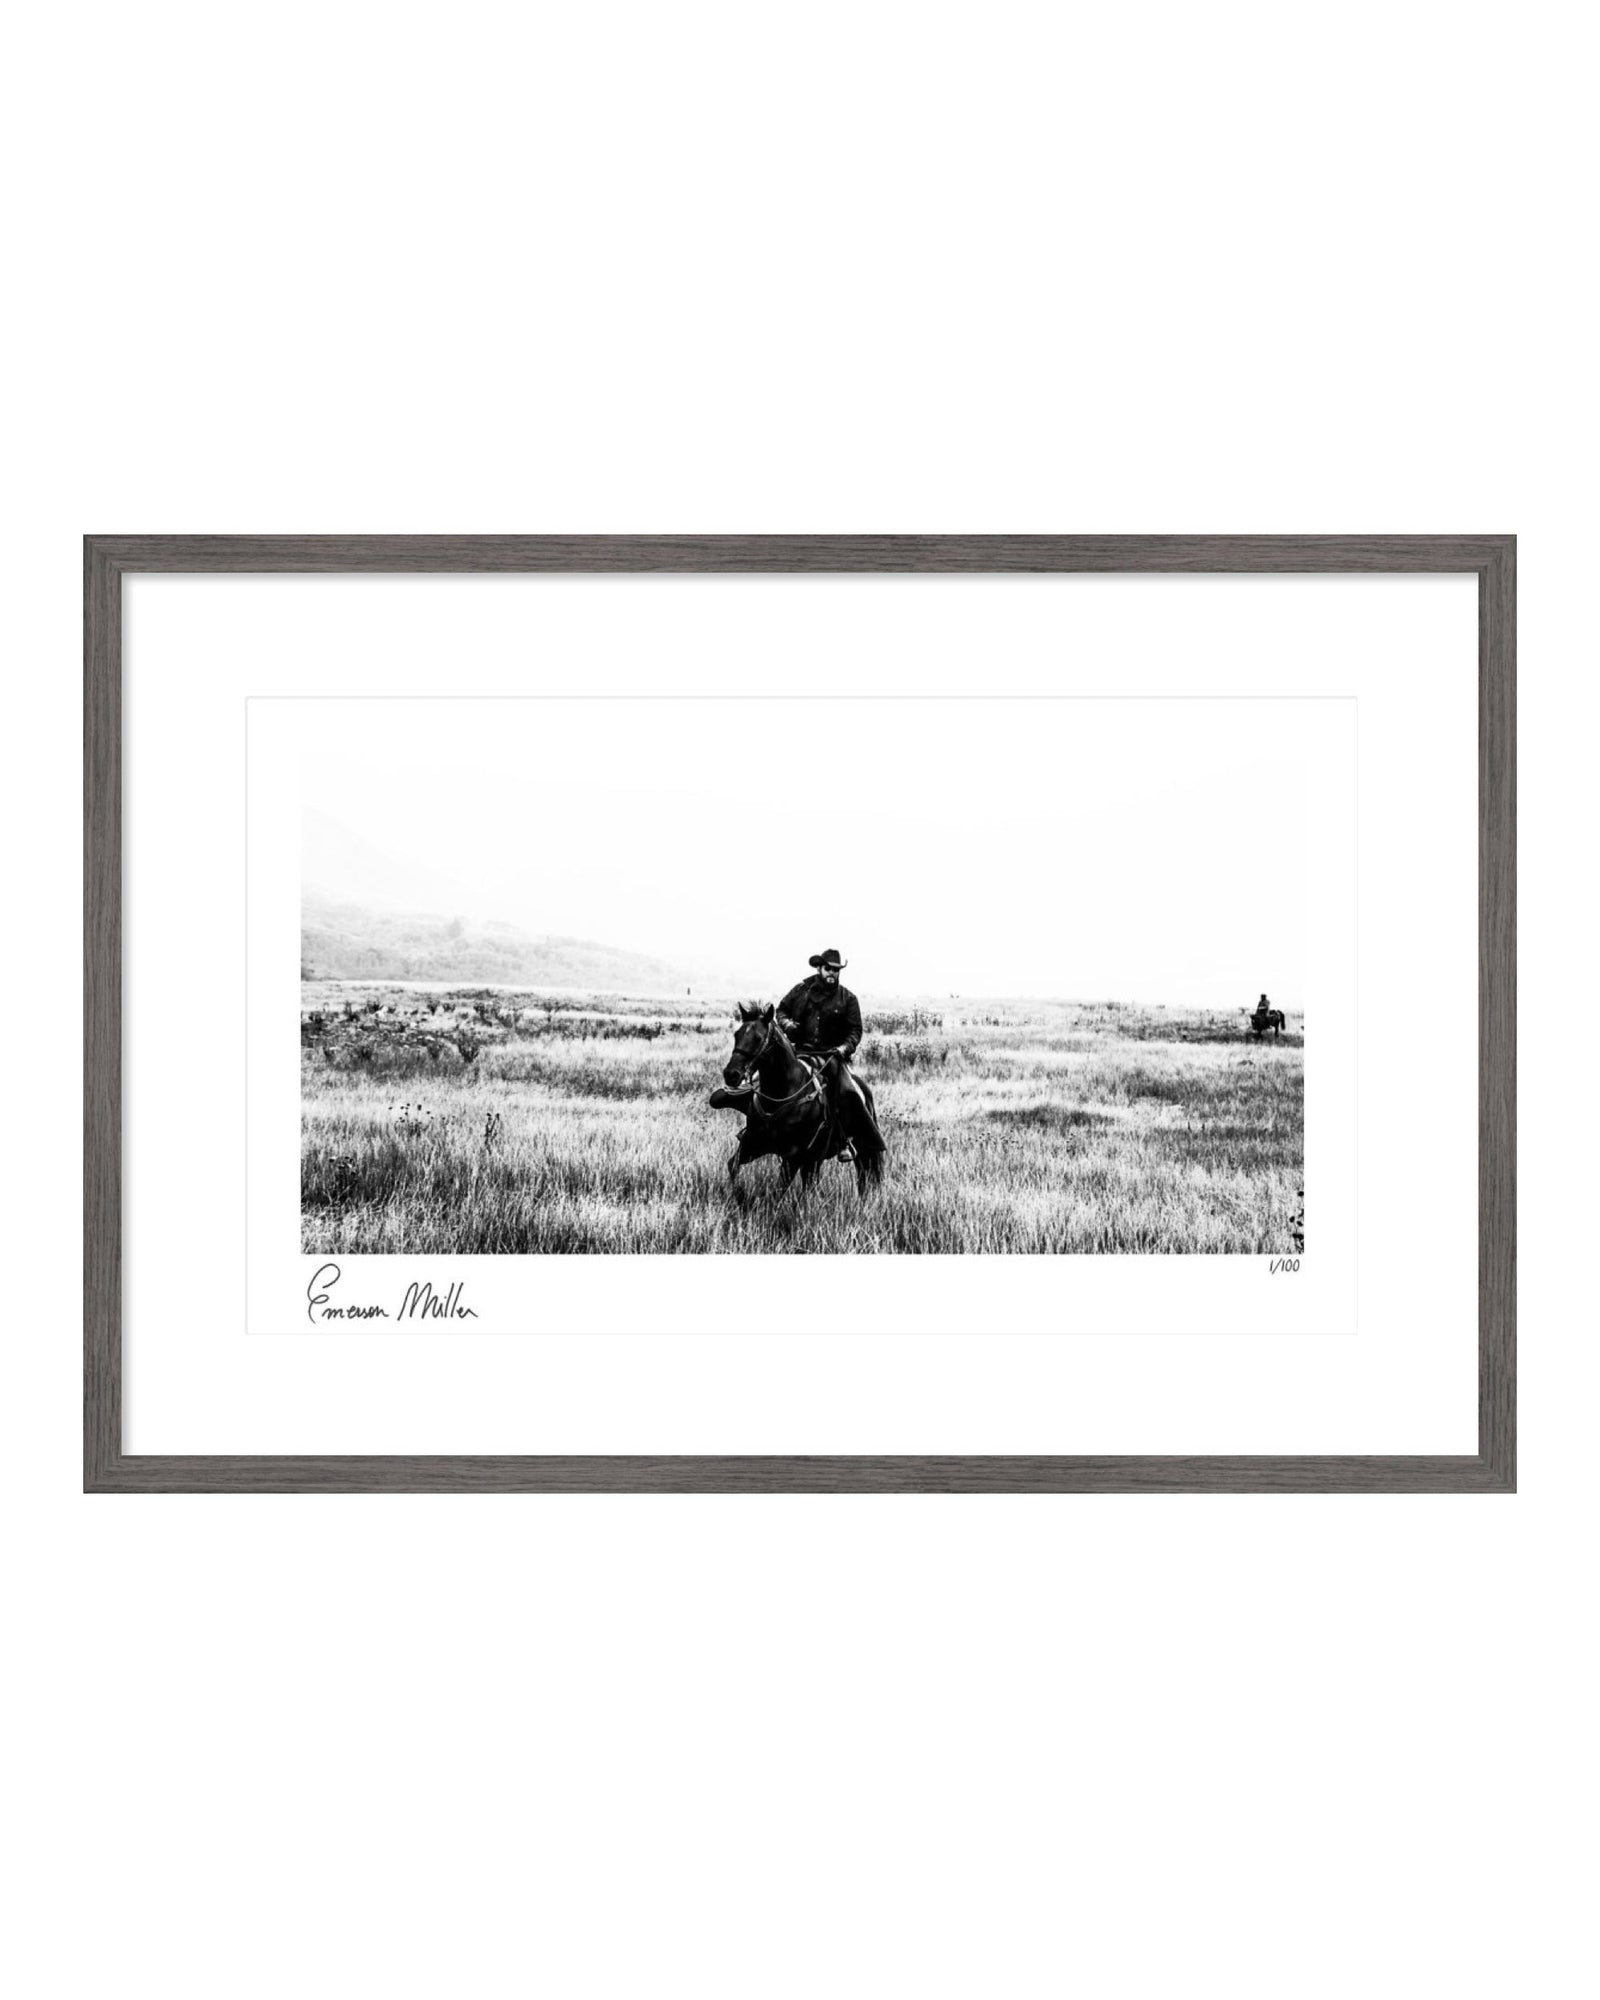 Rip on Horse by Yellowstone Set Photographer Emerson "Paco" Miller (Signed and Numbered)